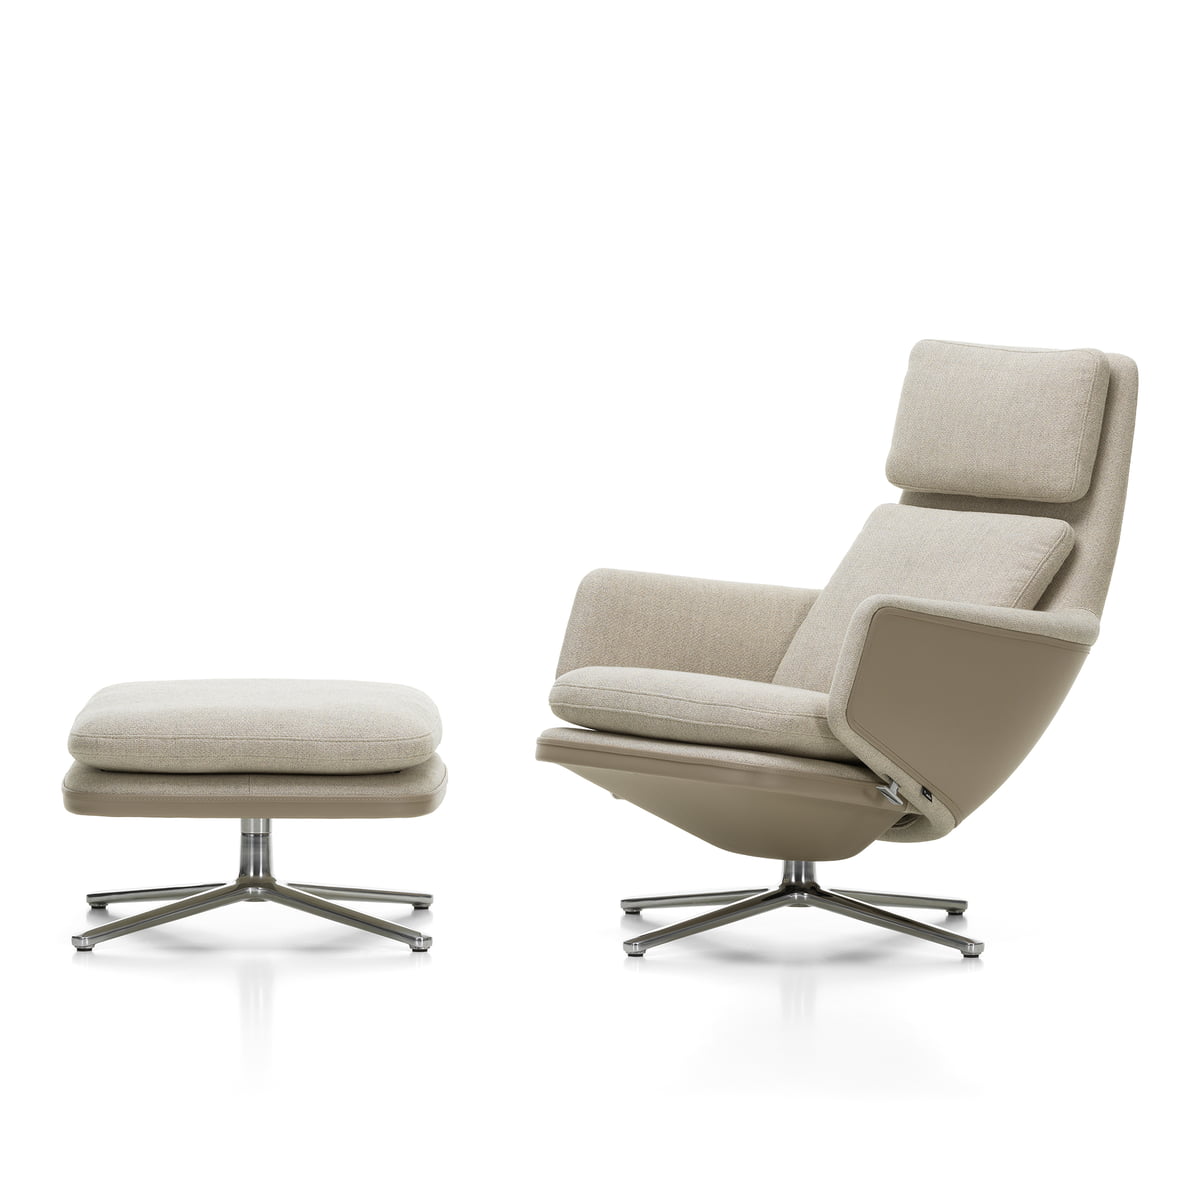 oor Vesting in stand houden Vitra - Grand Relax Fauteuil & Ottoman | Connox